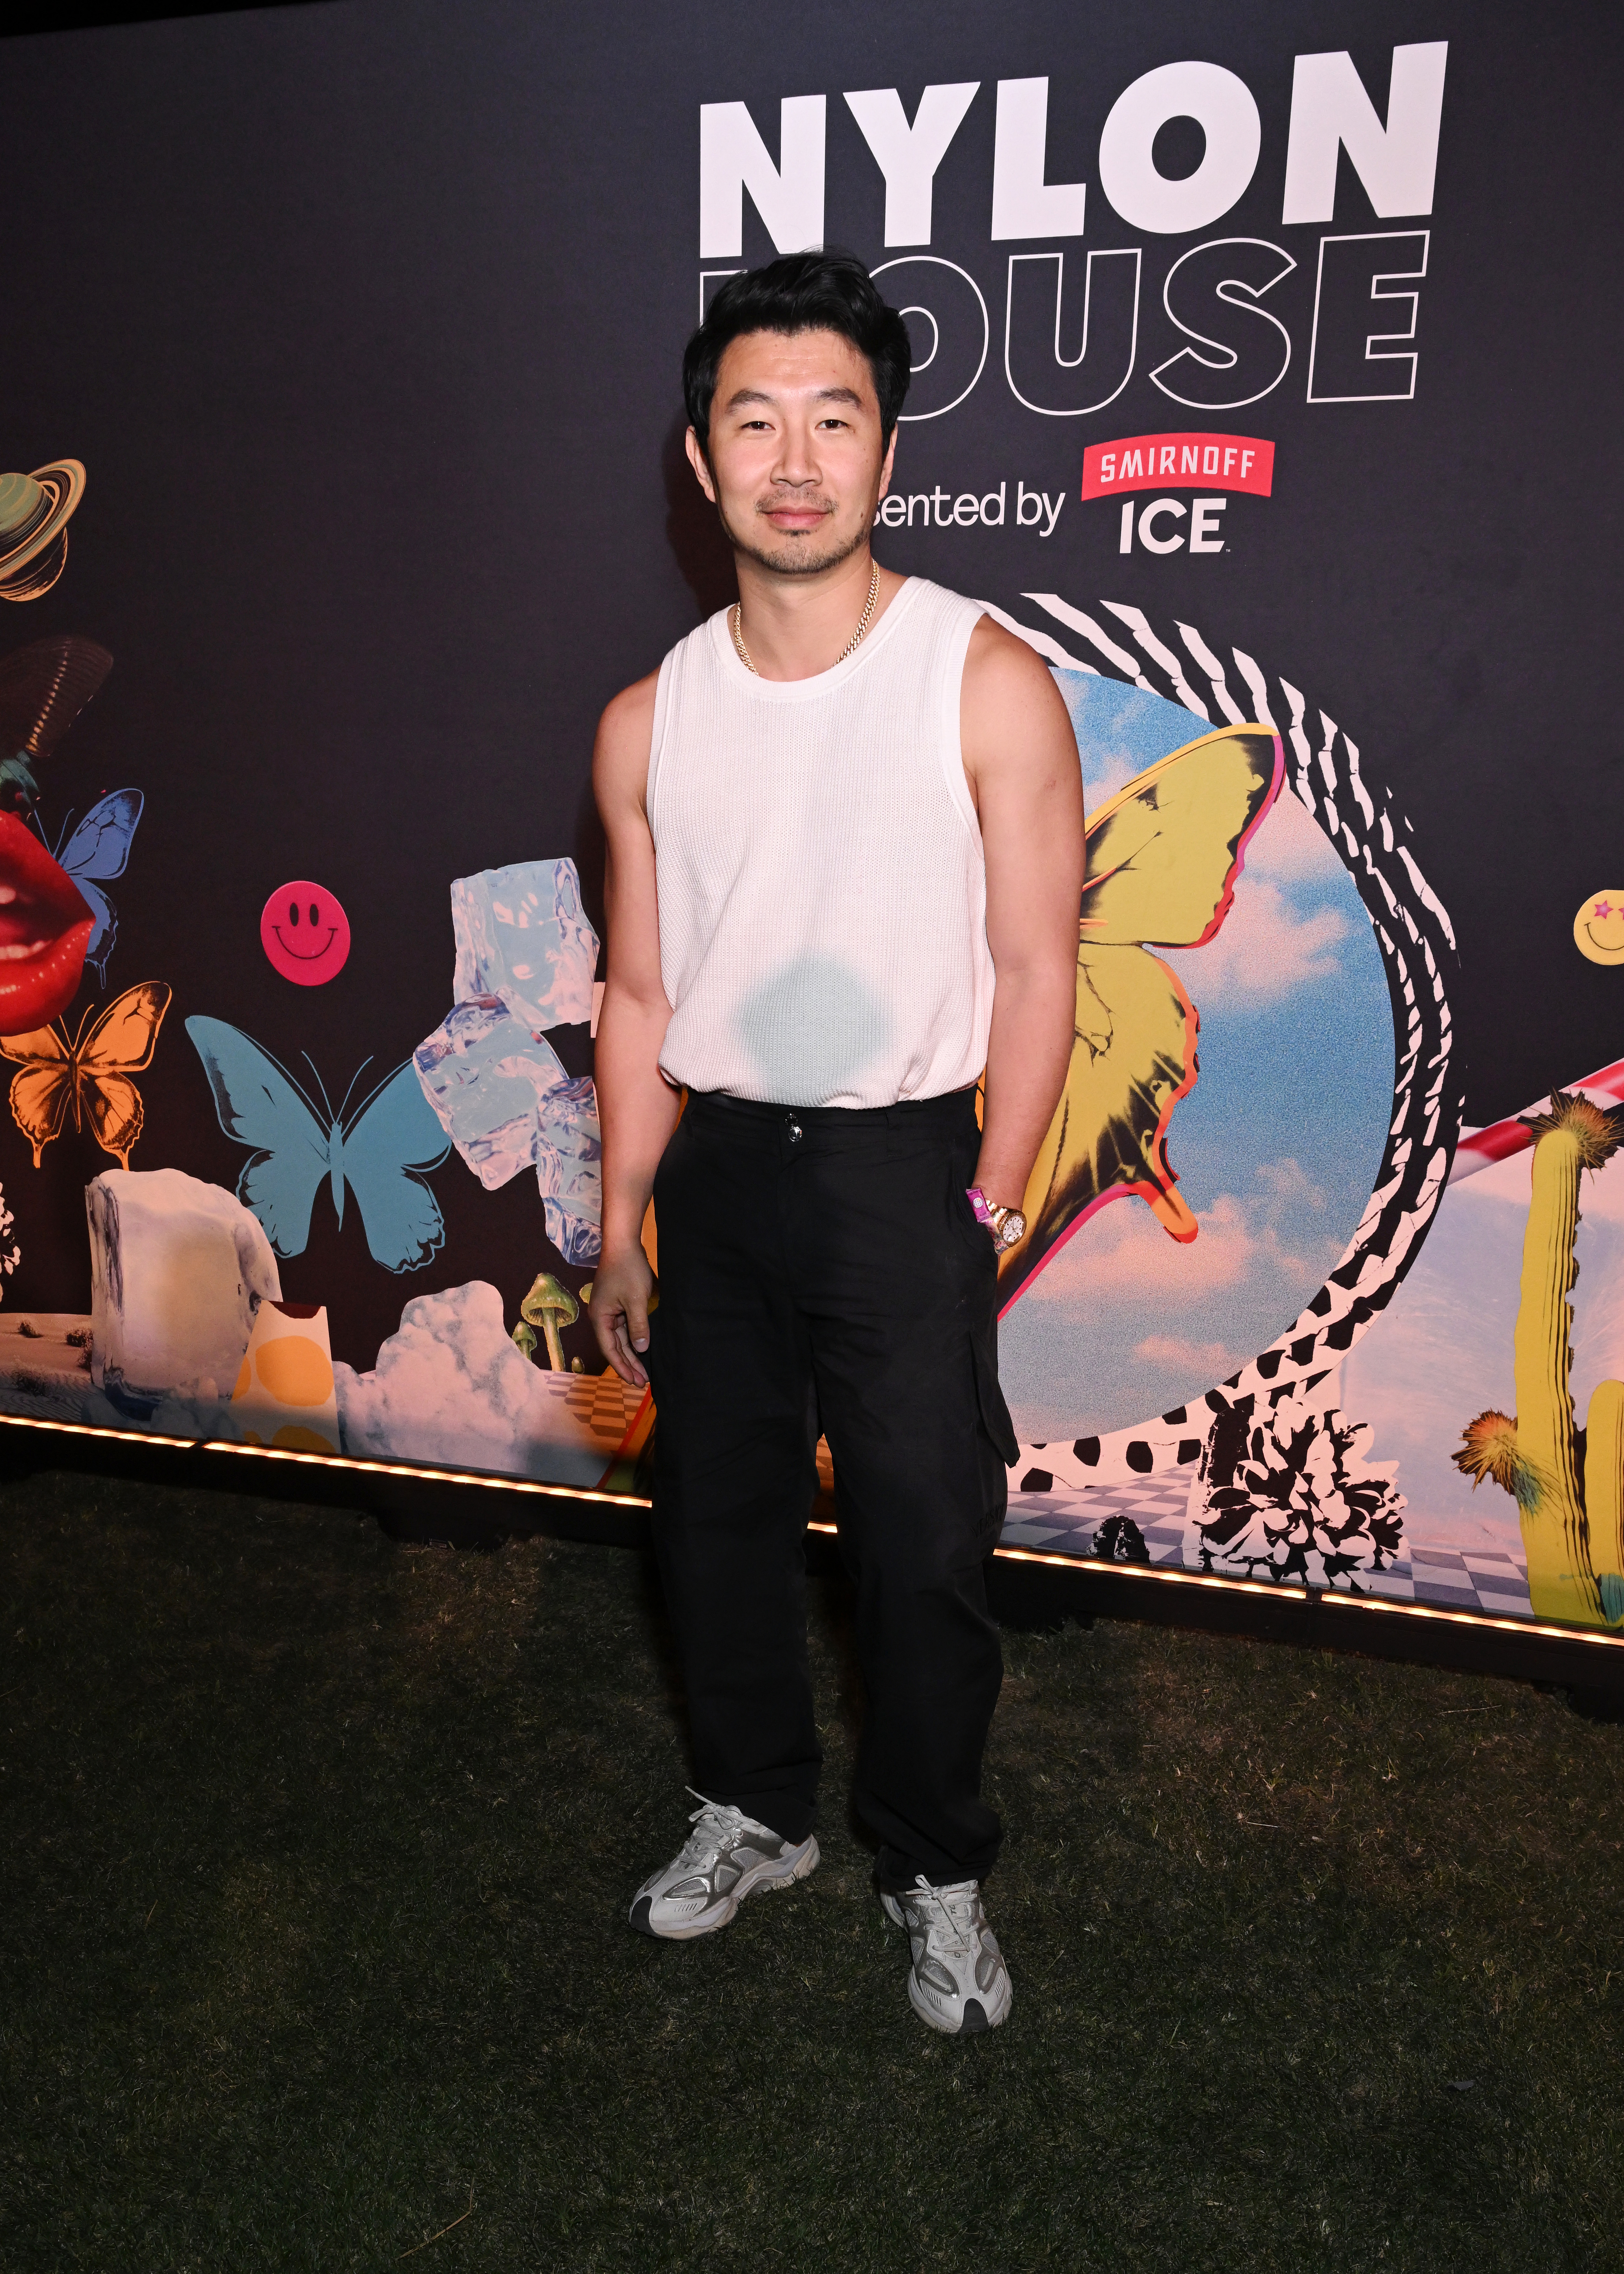 Man in sleeveless top and pants stands before event backdrop with decorative elements